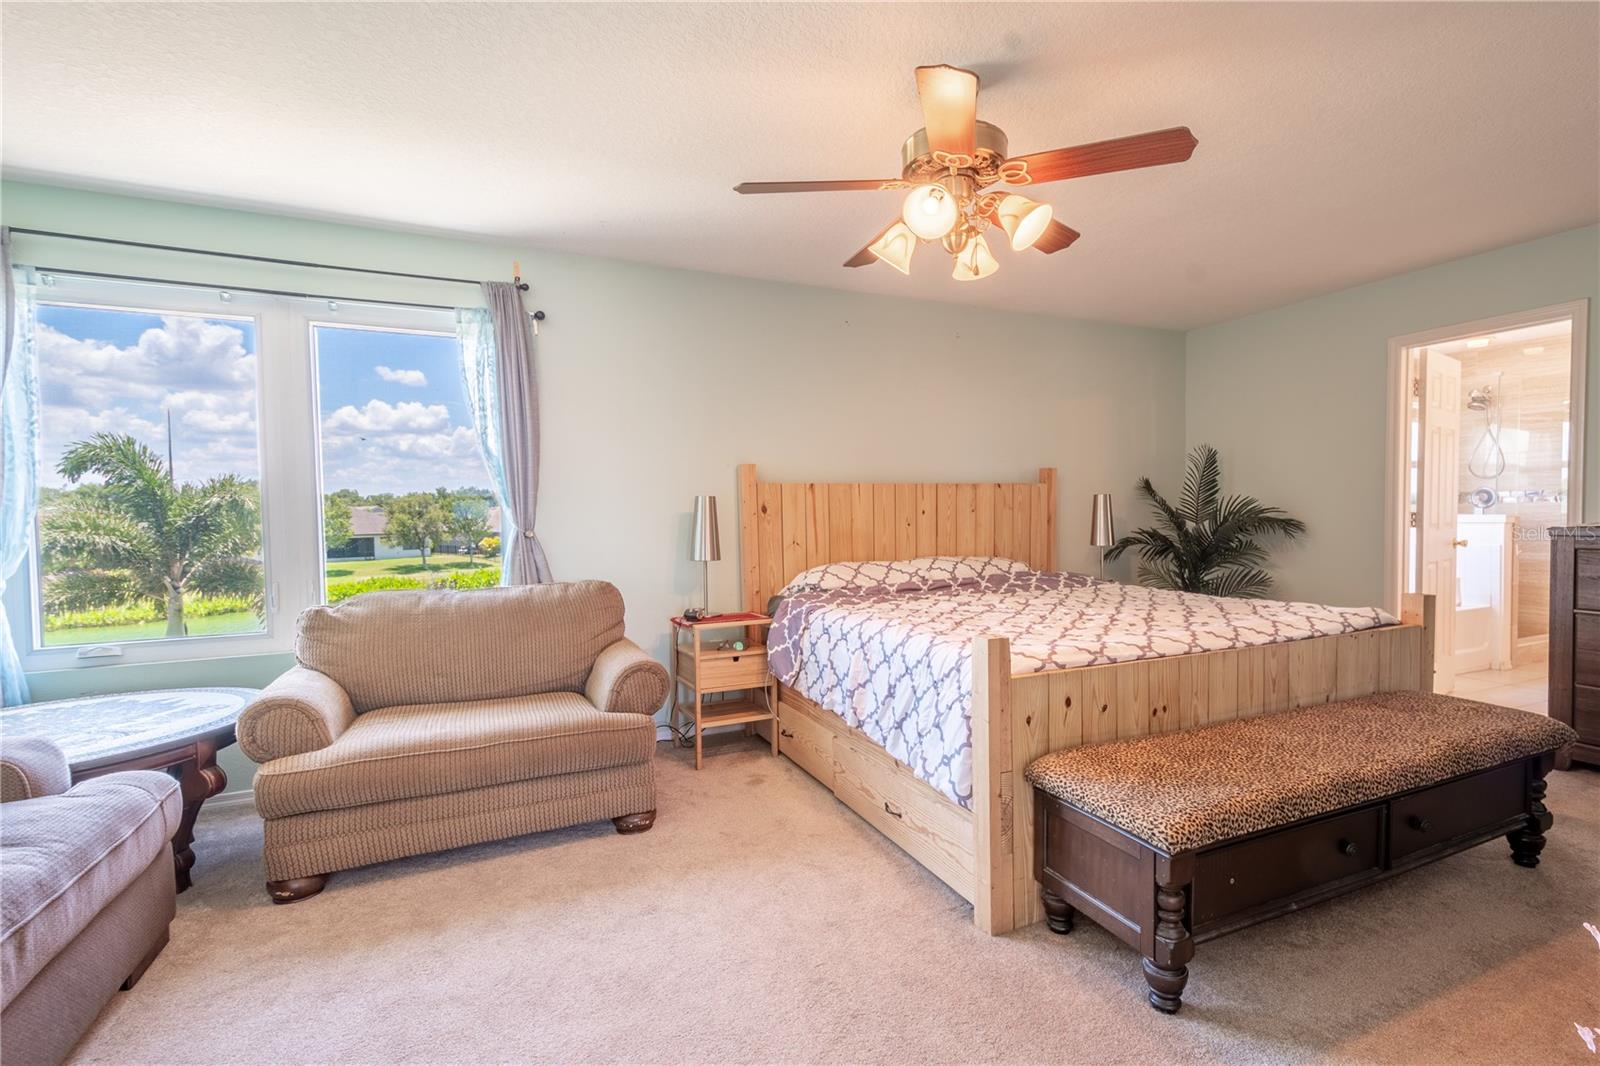 The primary bedroom 13x21  features plush carpet, a ceiling fan with light kit and an ensuite bath.